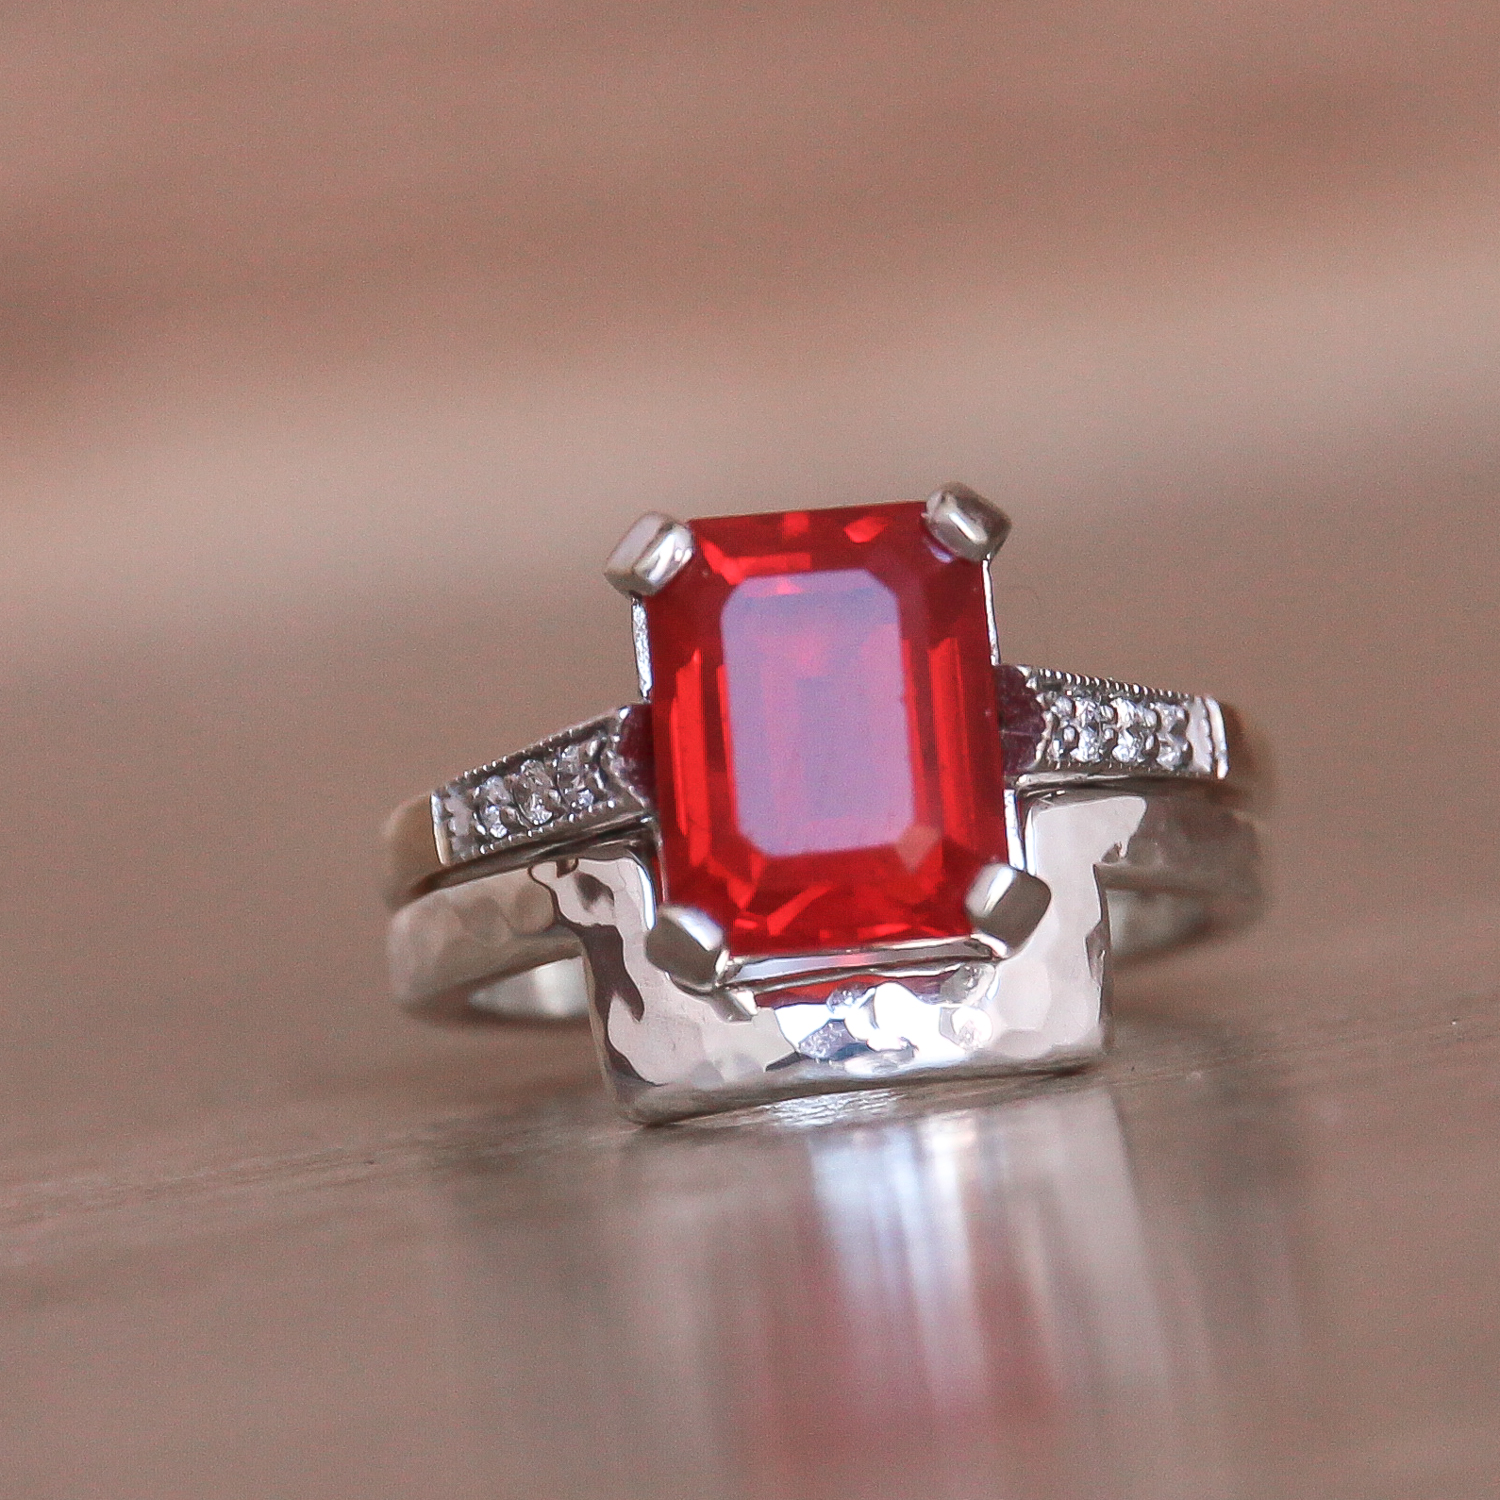 Shaped wedding ring for emerald cut engagement stone